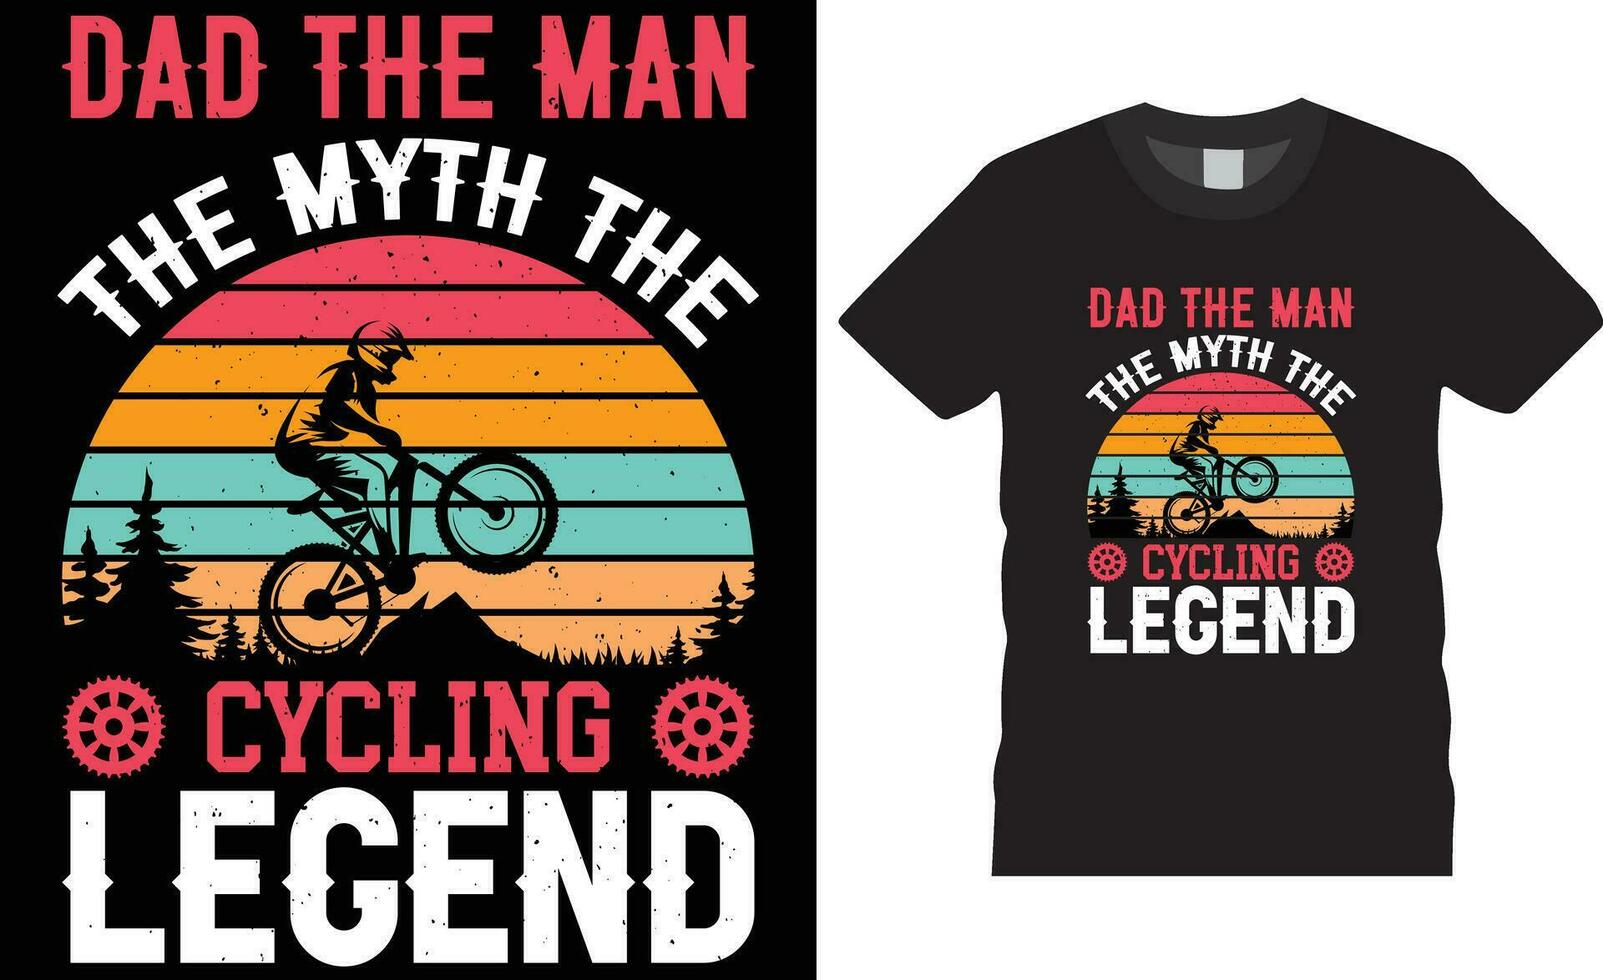 Dad the man the myth the cycling legend Bicycle T-Shirt Design vector